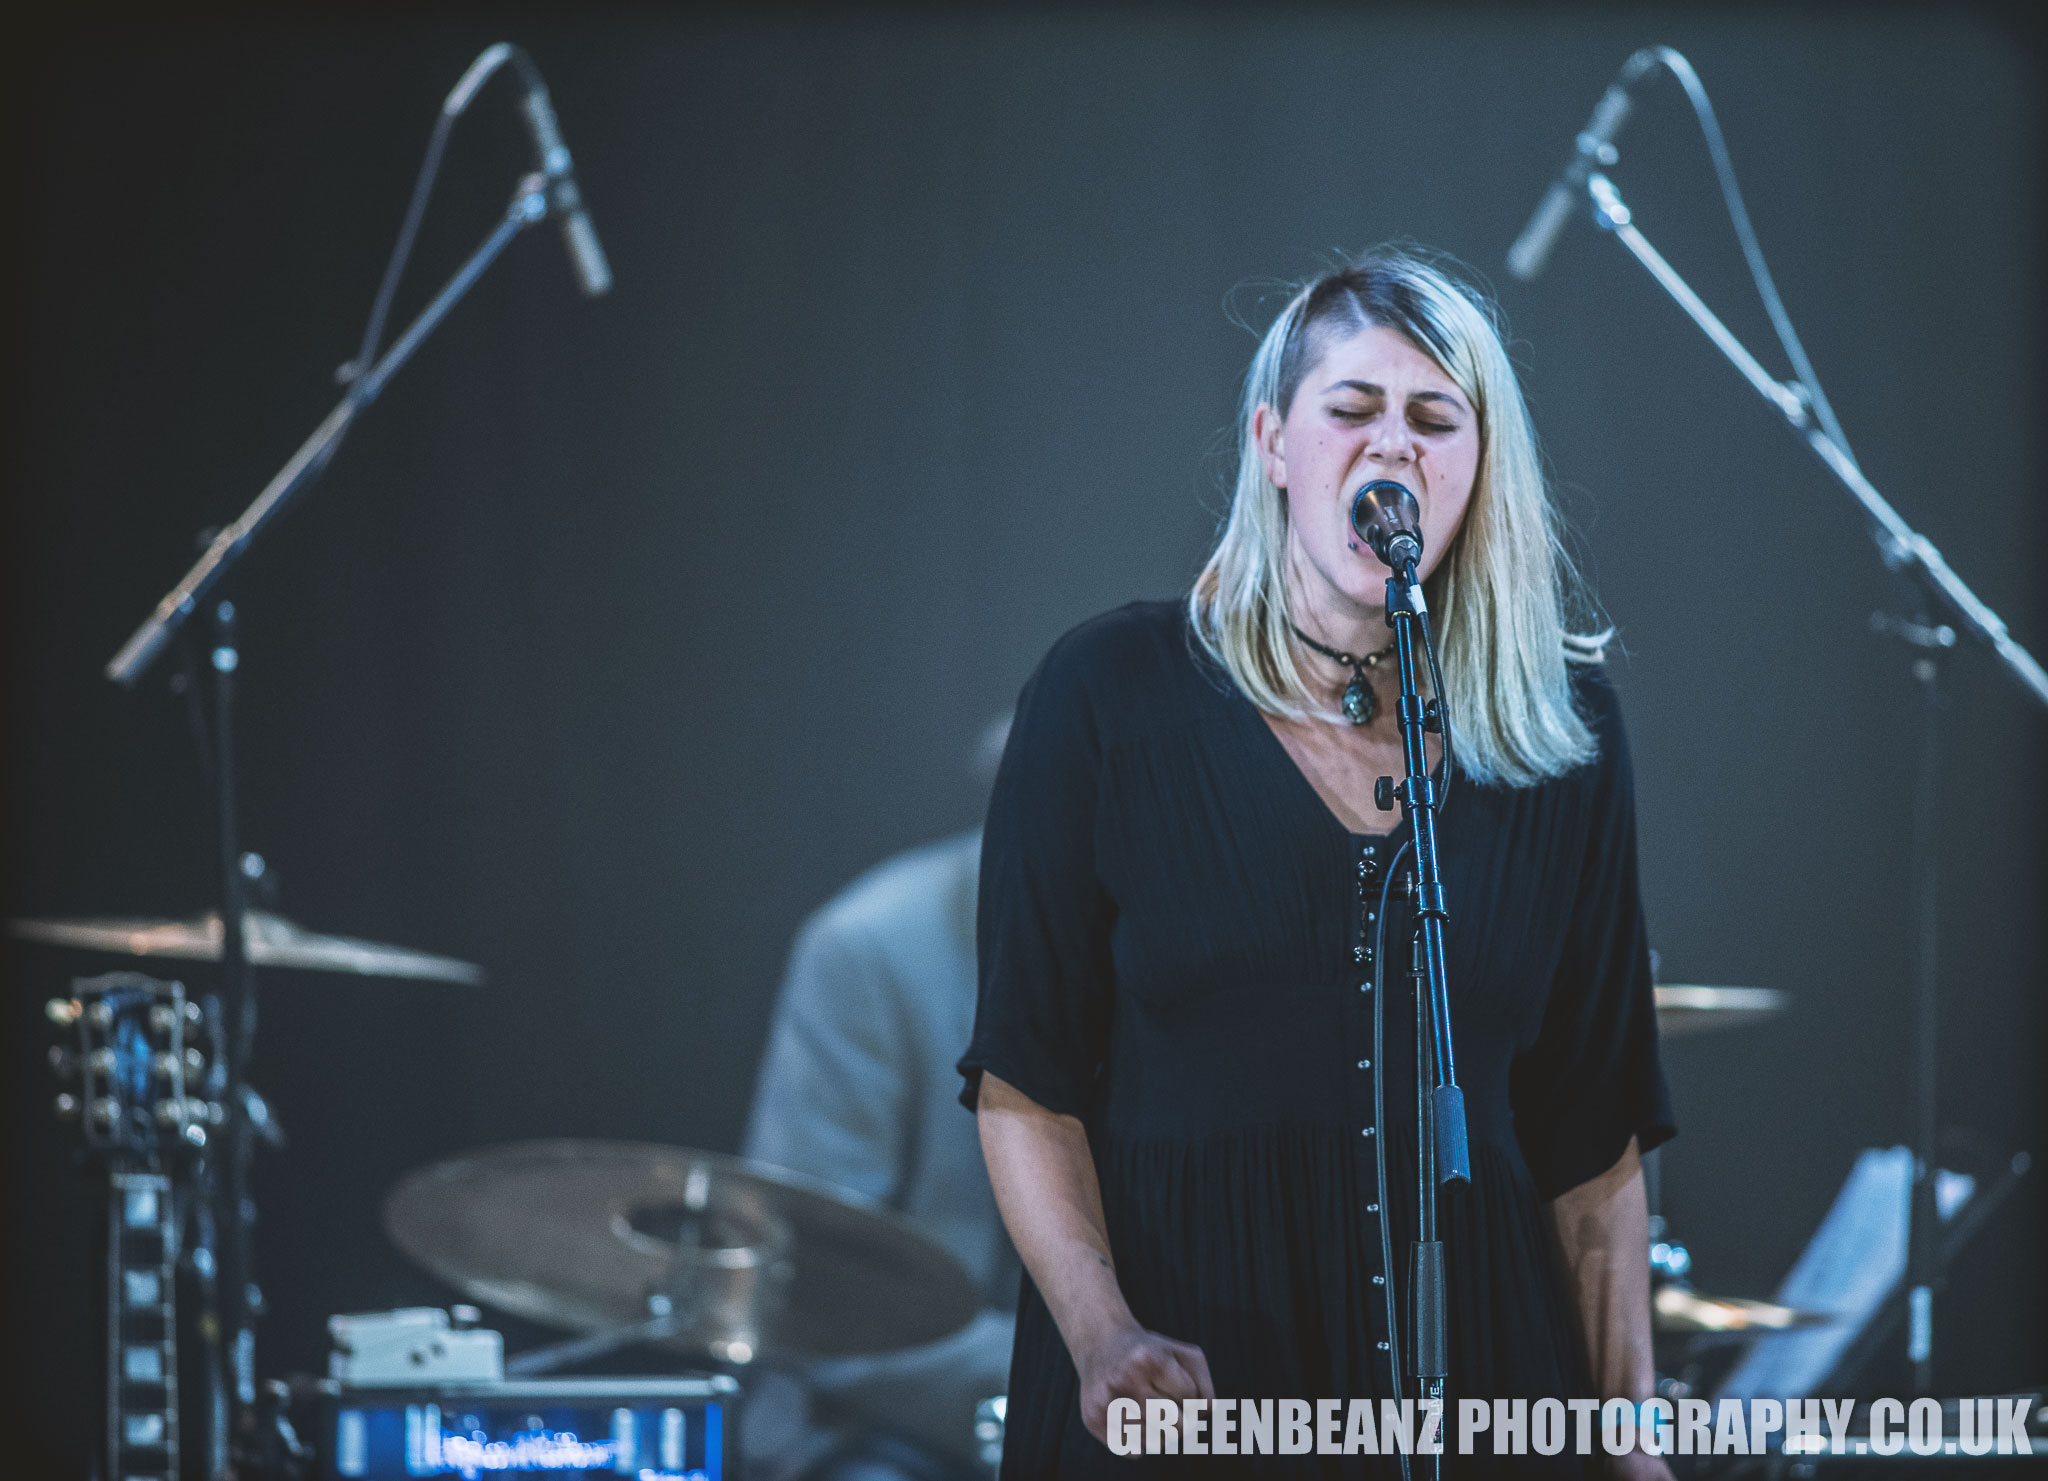 Elani Evangelou absolutely nails 'Oh Well' with The Martin Barre Band 2018